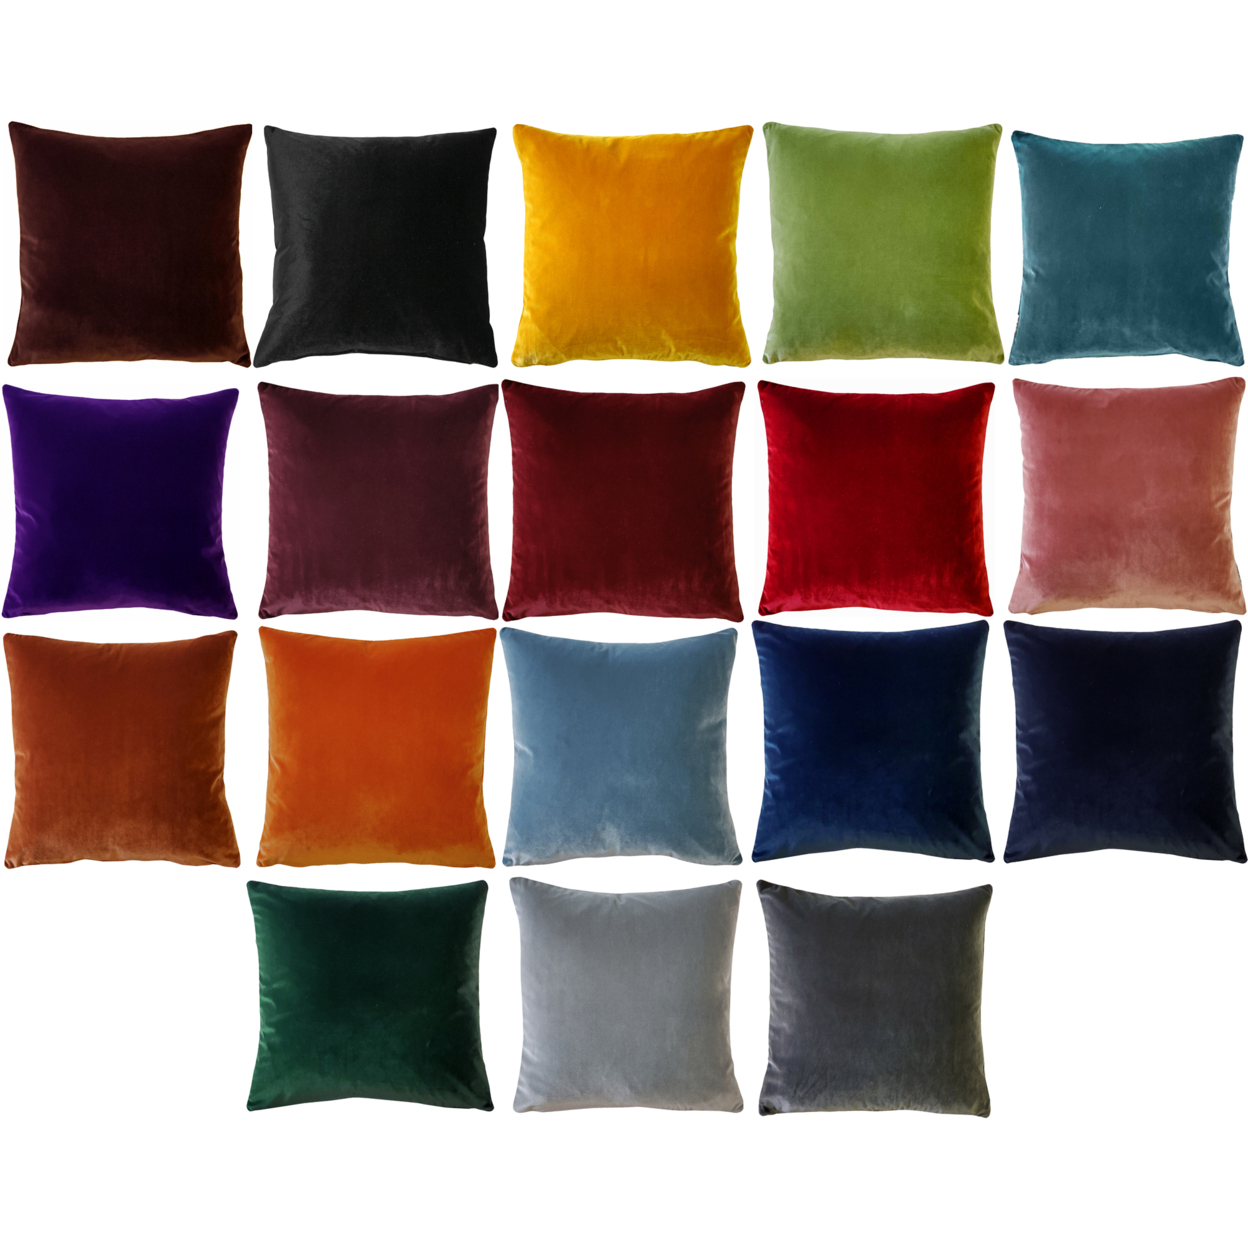 Castello Velvet Throw Pillows, Complete Pillow With Polyfill Pillow Insert (18 Colors, 3 Sizes) - Purple, 20x20